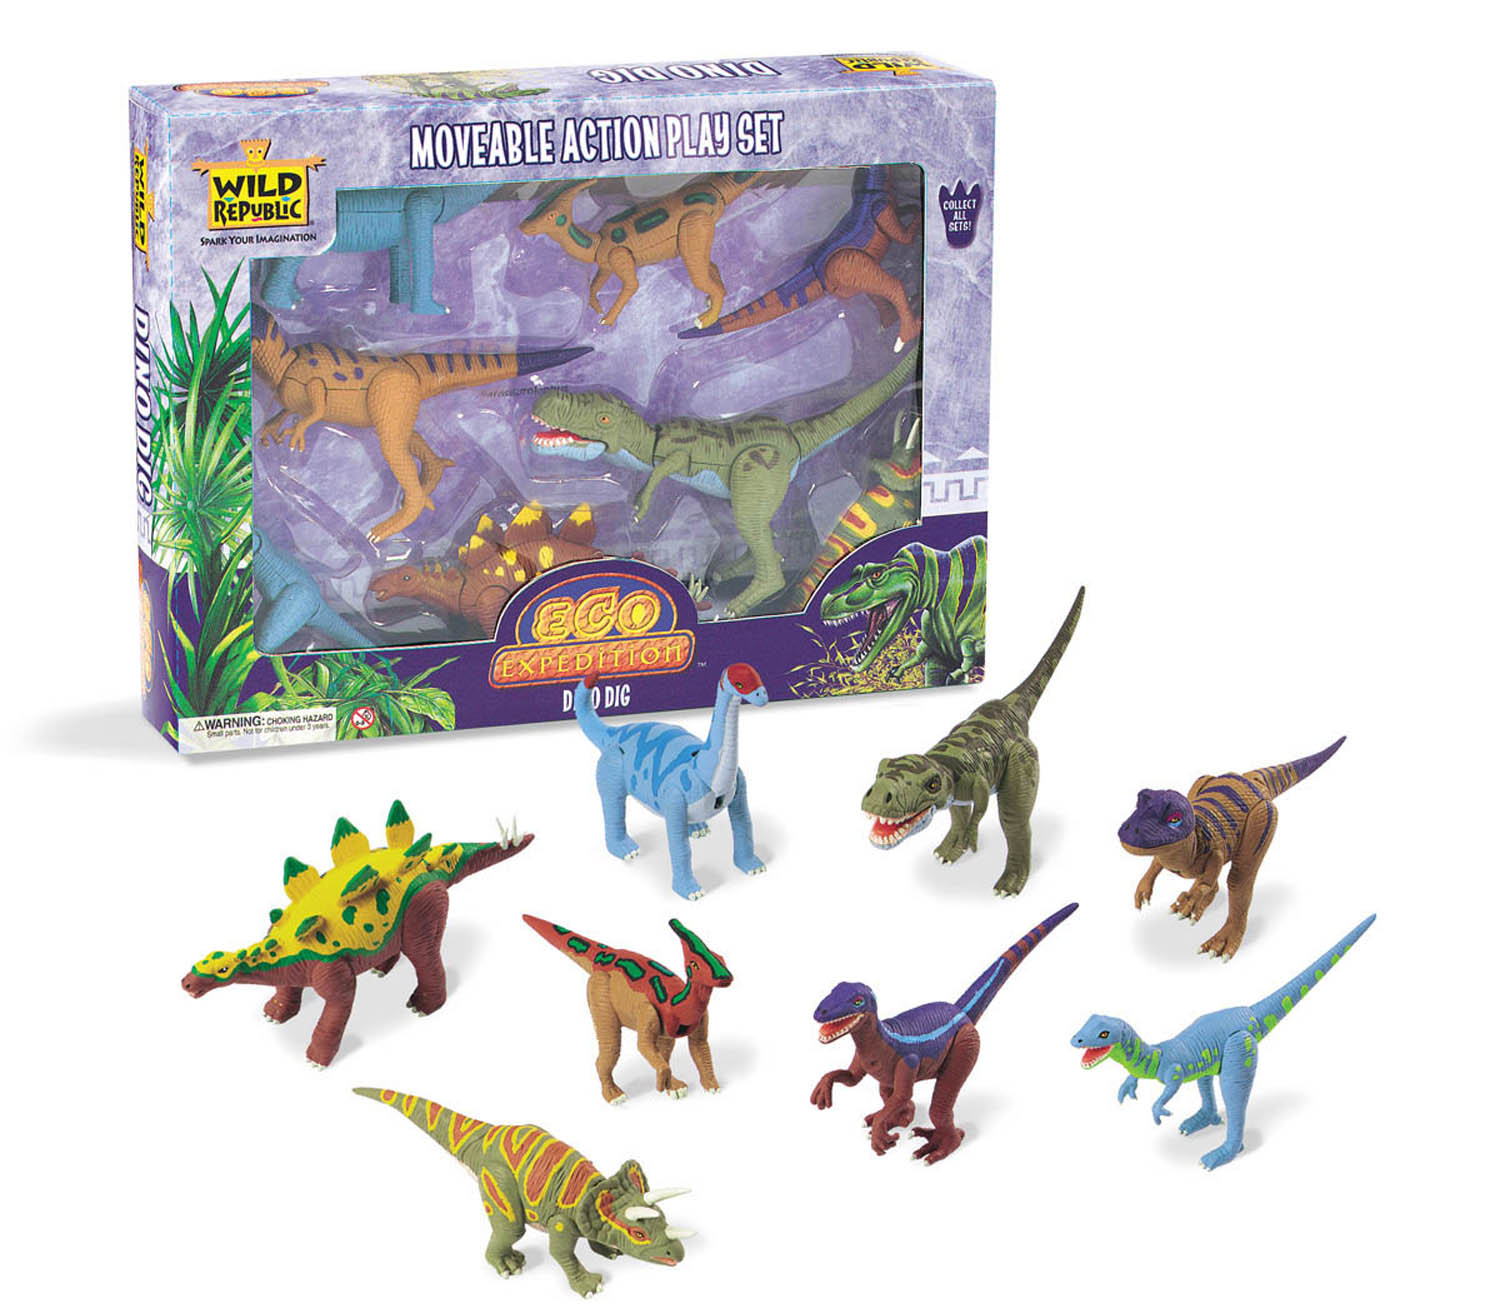 Wild Republic Eco Expedition Dino Dig Moveable Play Set